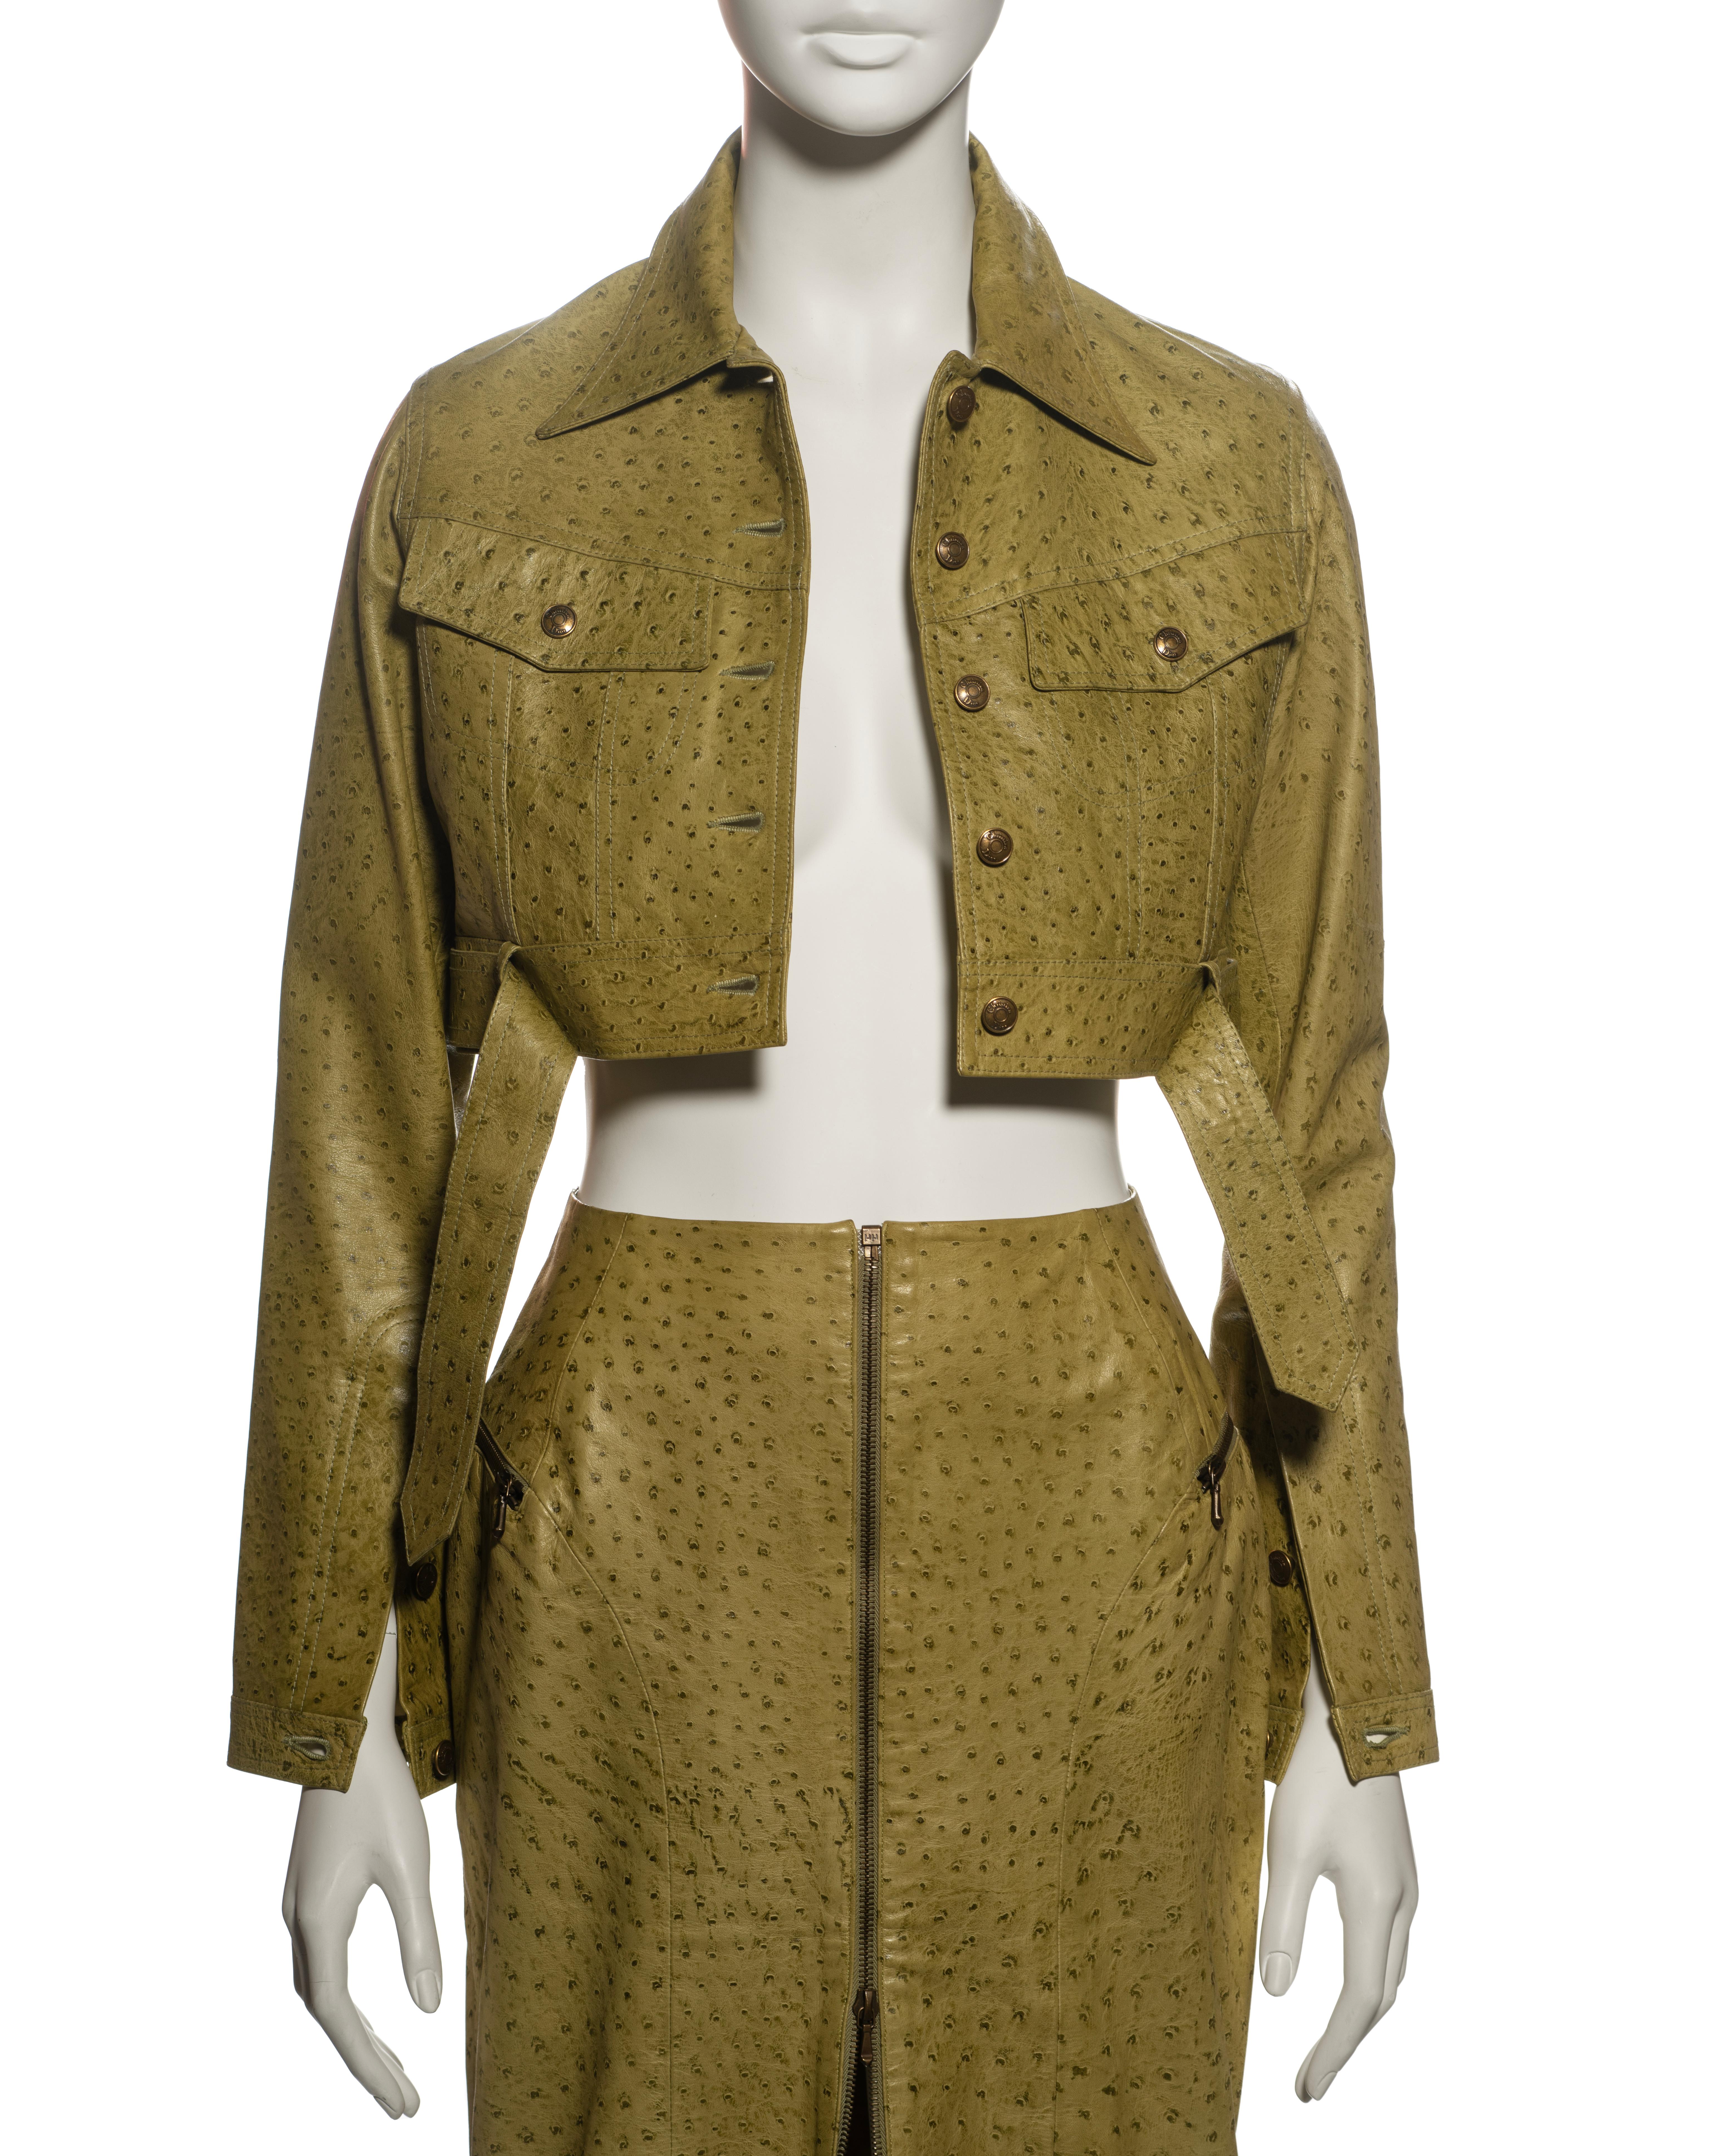 Christian Dior by John Galliano Green Lambskin Leather Jacket and Skirt, fw 2000 In Excellent Condition In London, GB